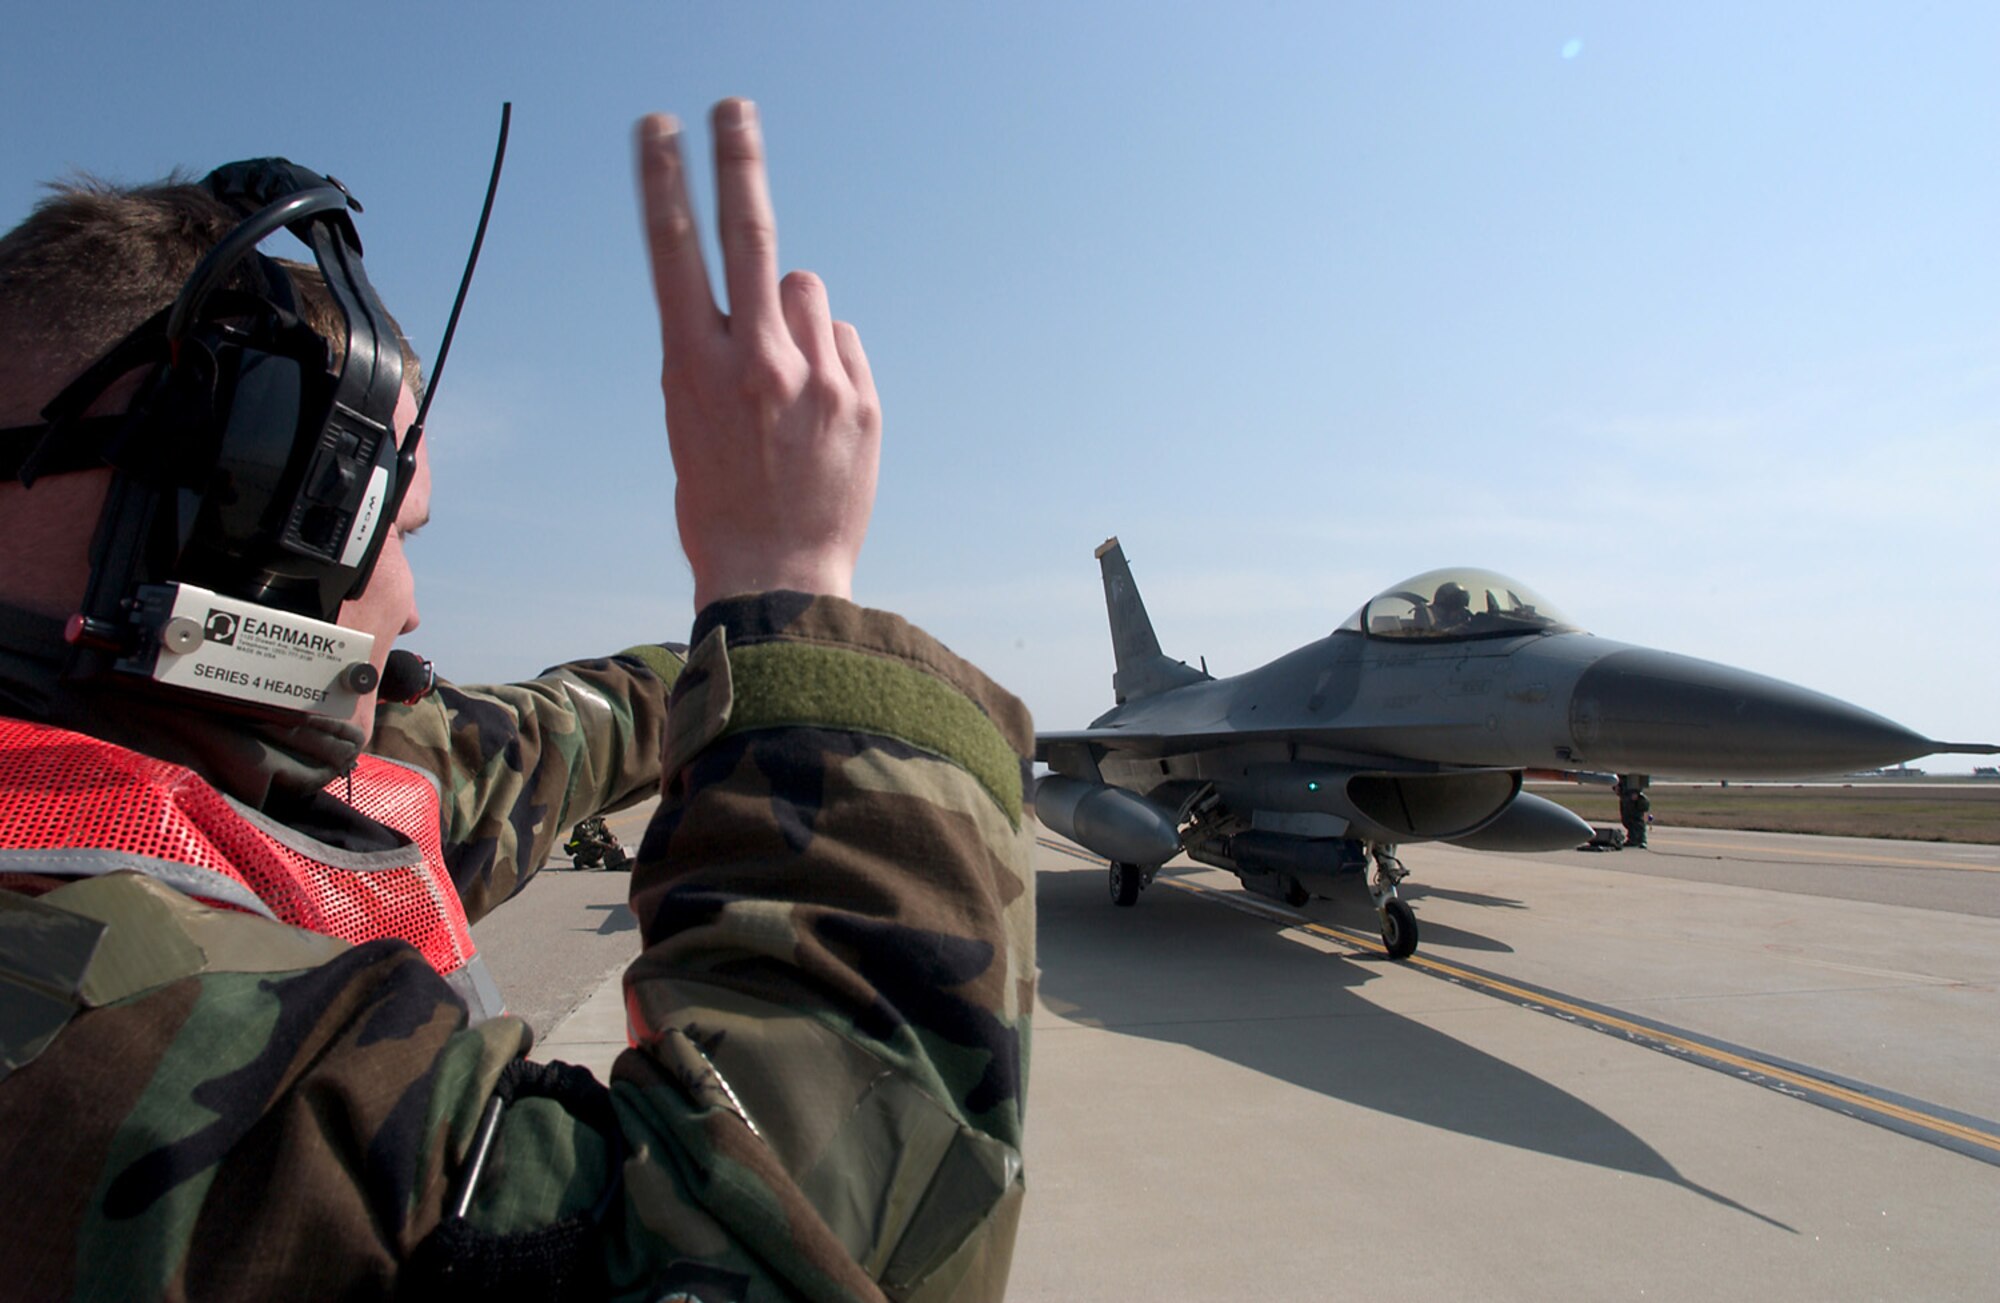 KUNSAN AB, Republic of Korea -- Senior Airman Johnathon Lavender, 8th Aircraft Maintenance Squadron, marshals an F-16 Viper on the flightline here April 19. Maintenance Airmen are the backbone of the 8th Fighter Wing?s mission, keeping the aircraft in the fight. ?The dedication of our maintenance Airmen, keeping their aircraft flying, is what enables us to claim air superiority everywhere we go,? said Col. Preston Thompson, 8th Fighter Wing vice commander and command pilot with more than 4,000 flying hours. The 8th Fighter Wing is currently undergoing an operational readiness inspection to test its ability to conduct its wartime mission. (U.S. Air Force photo by Senior Airman Barry Loo)  